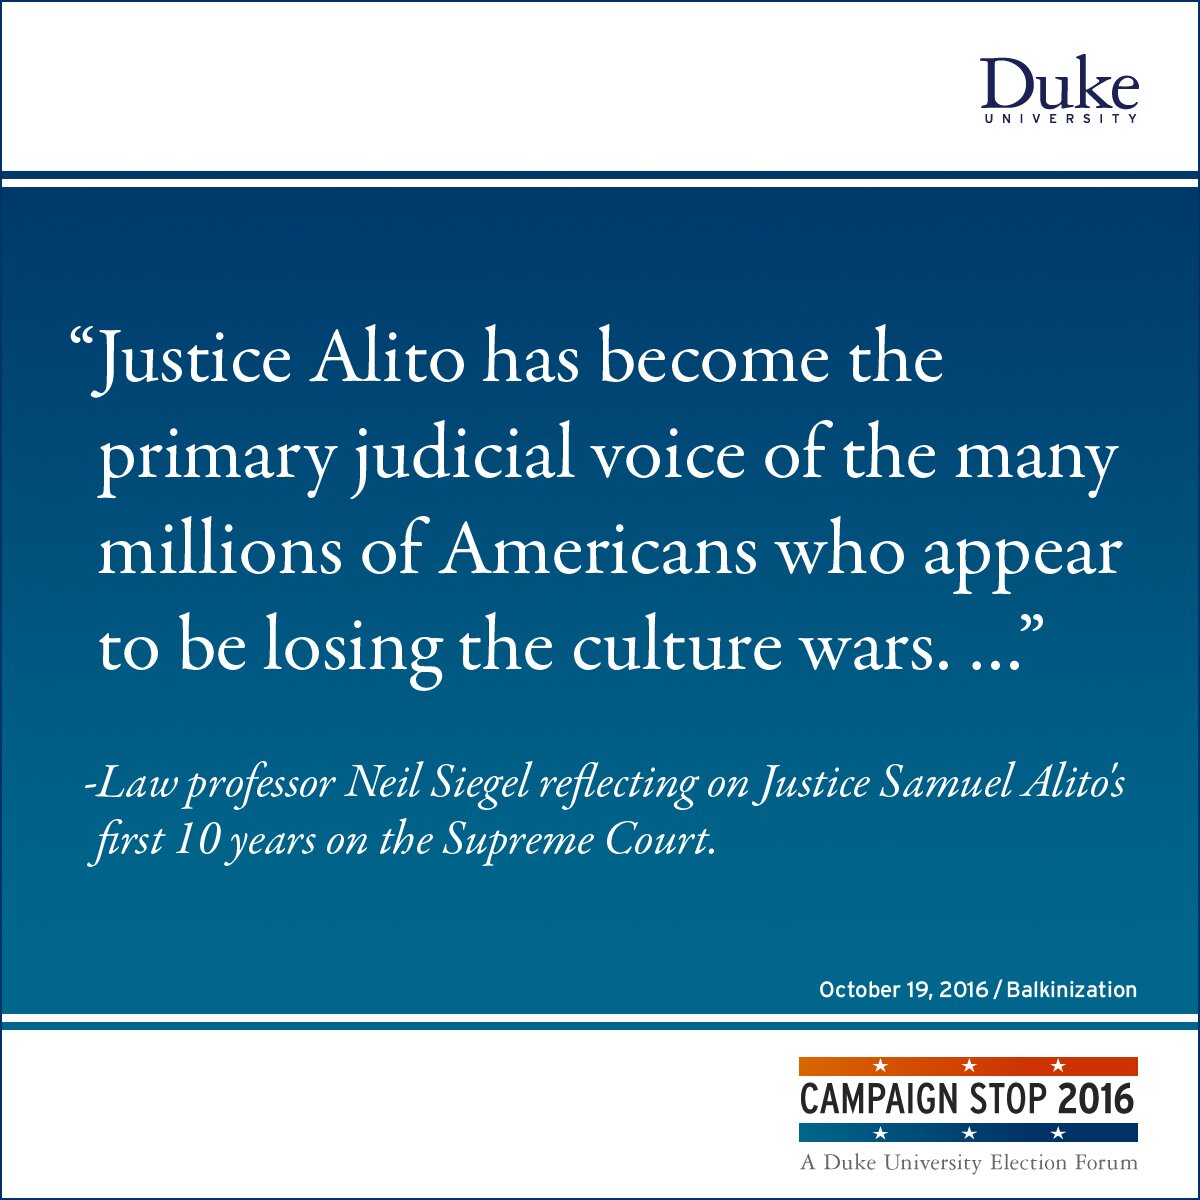 “Justice Alito has become the primary judicial voice of the many millions of Americans who appear to be losing the culture wars. …” -Law professor Neil Siegel reflecting on Justice Samuel Alito